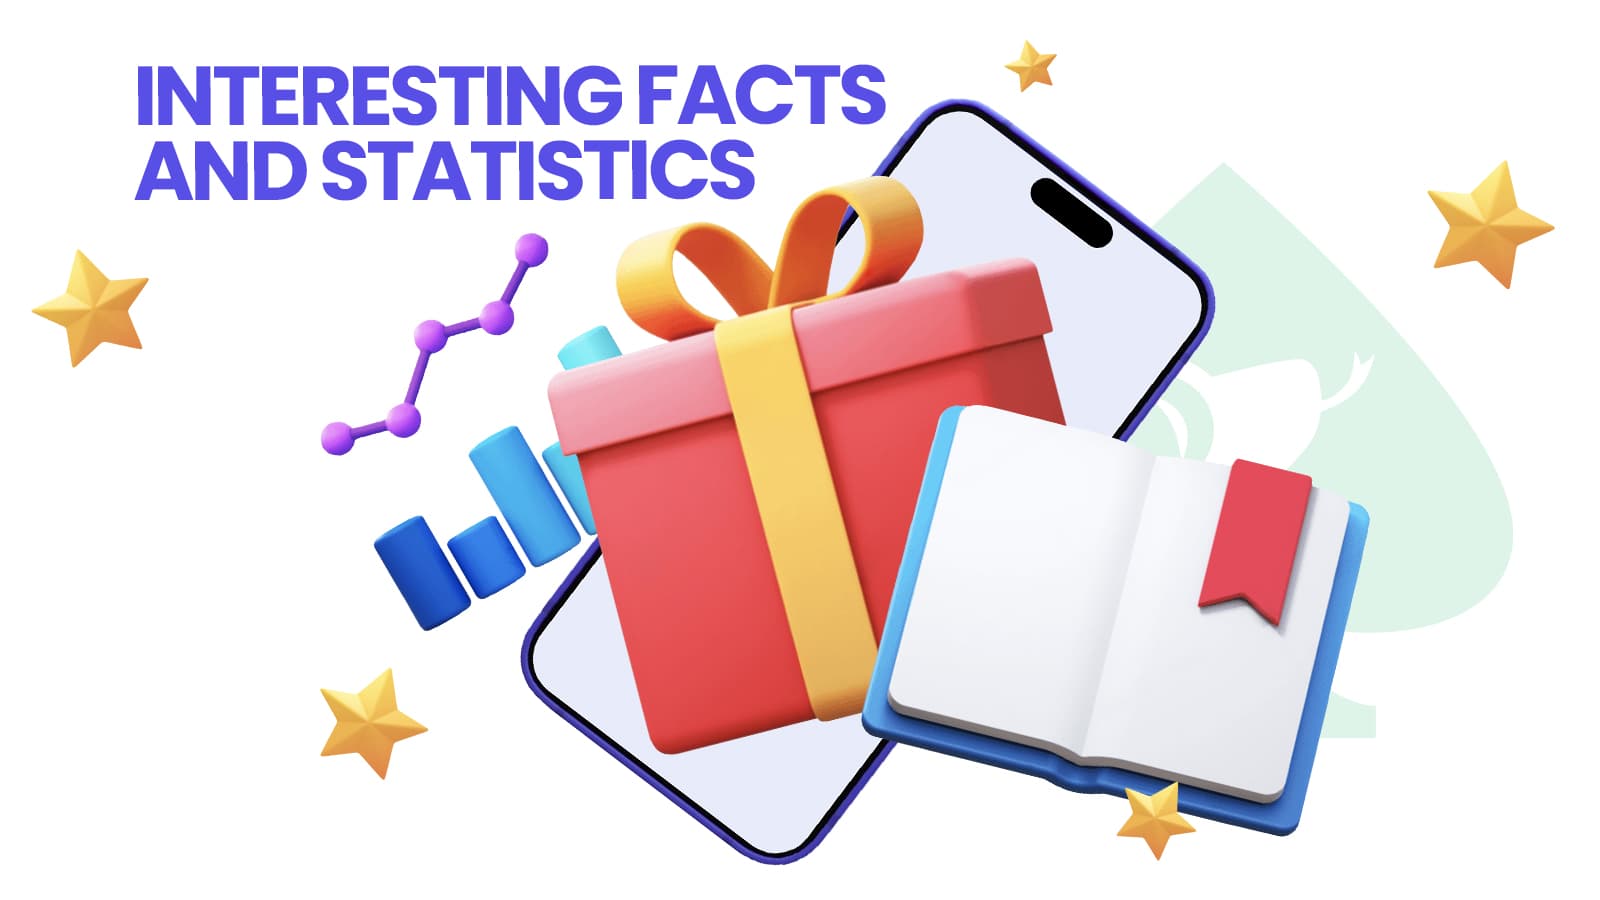 facts about casino welcome bonus